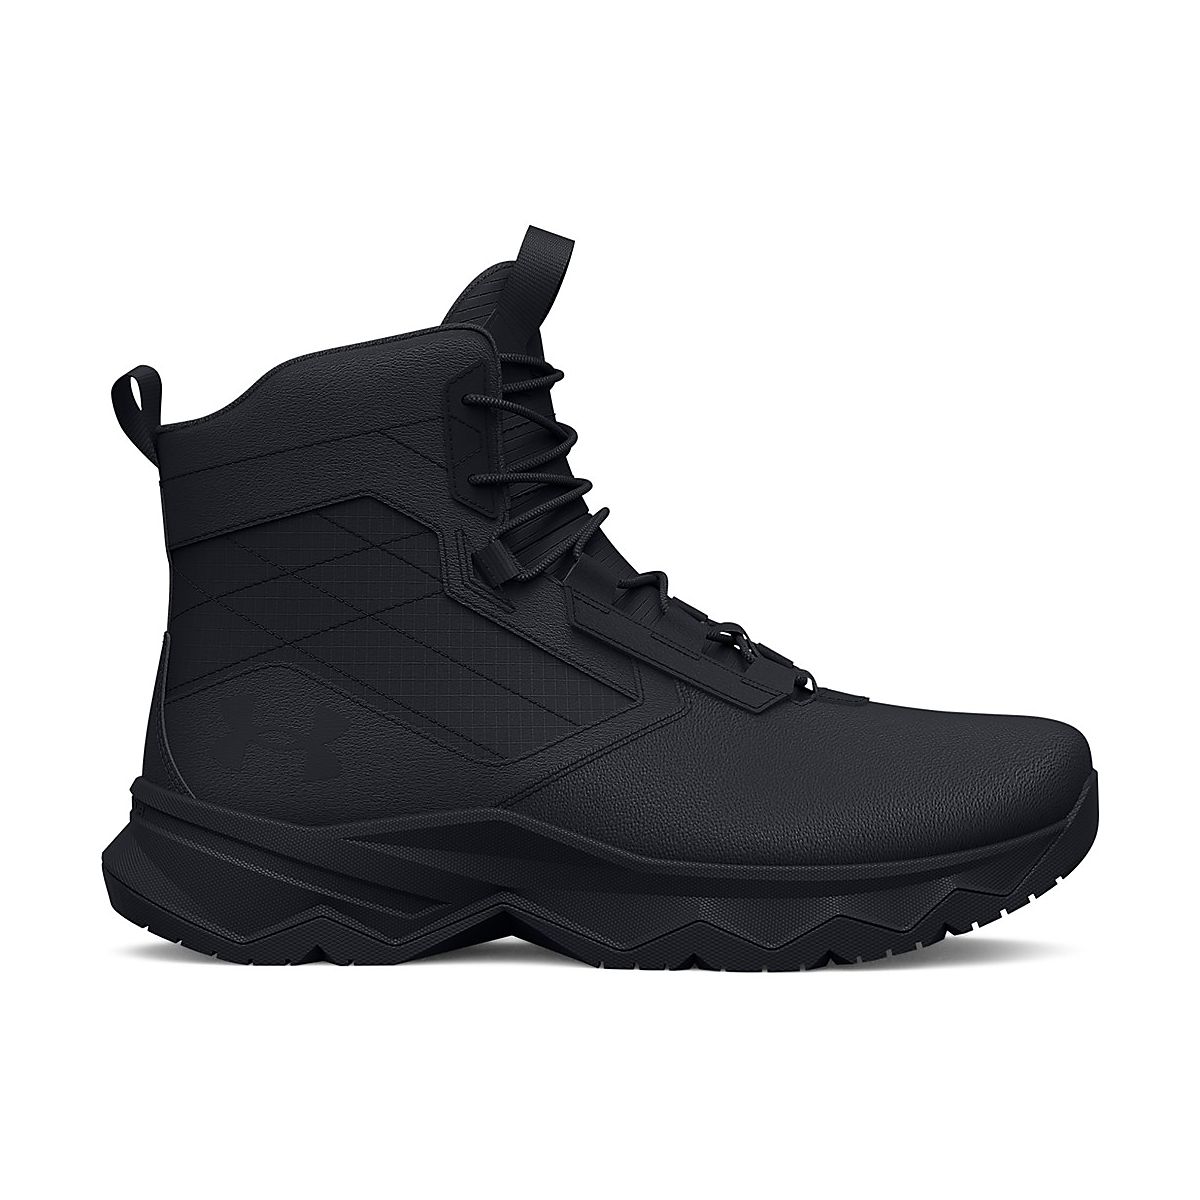 Under Armour Men's Stellar G2 6 in Tactical Boots | Academy